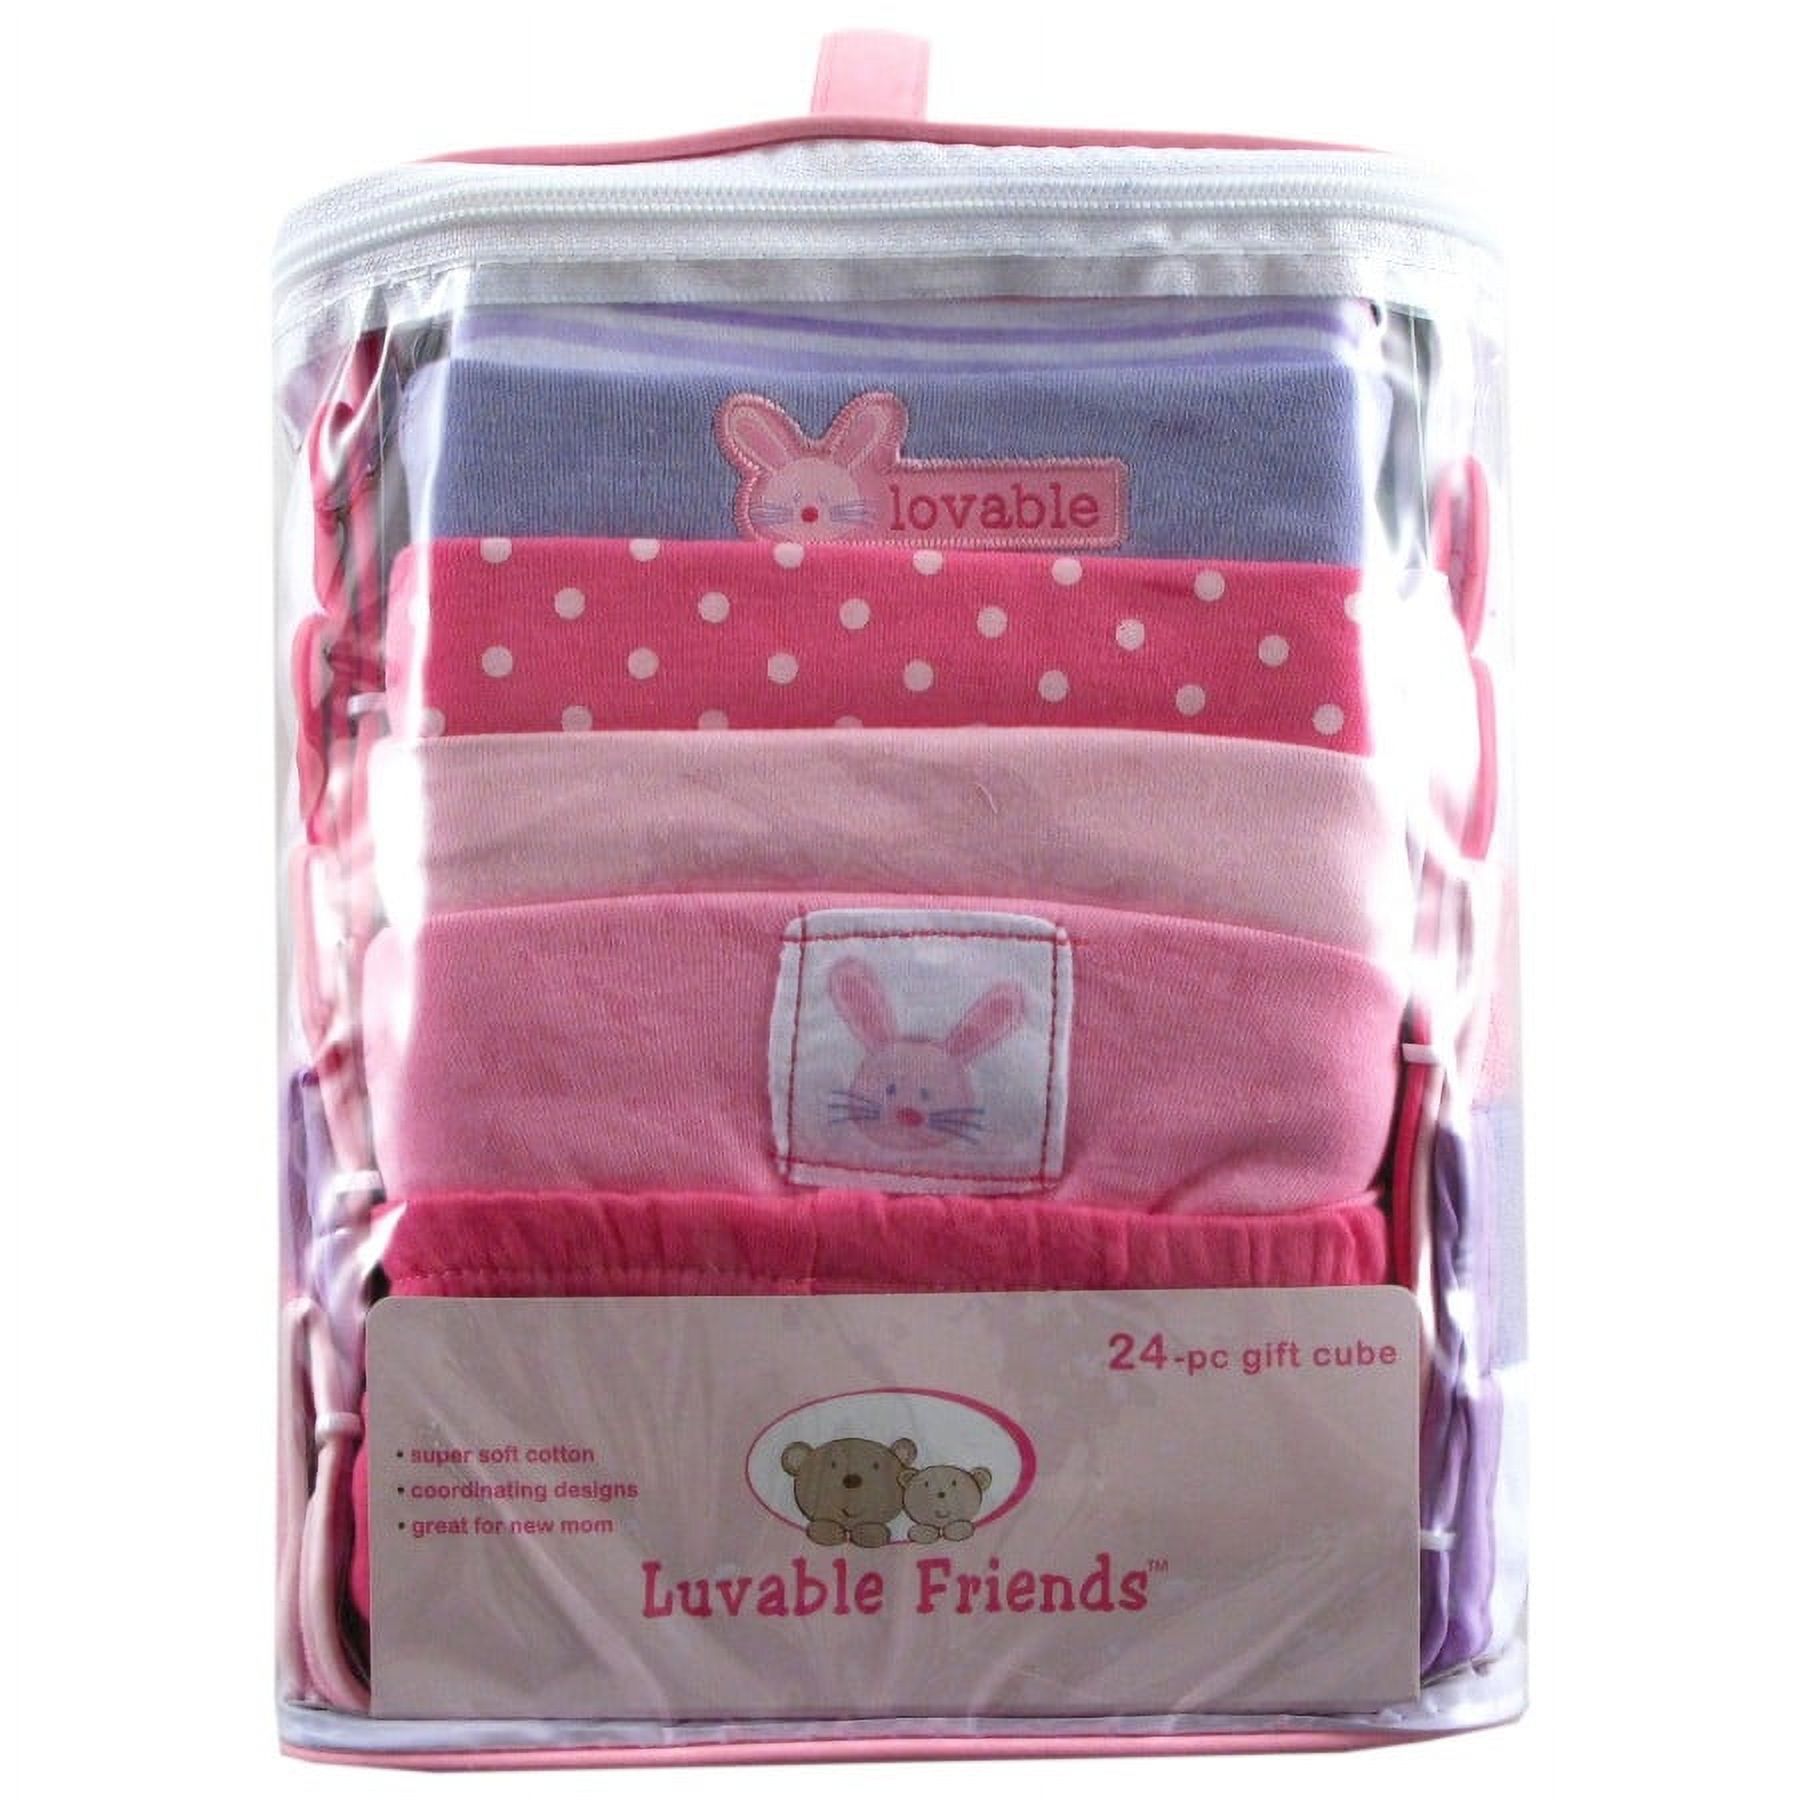 Luvable Friends Baby Girl Layette Gift Cube, Pink Bunny, 0-3 Months - image 2 of 2